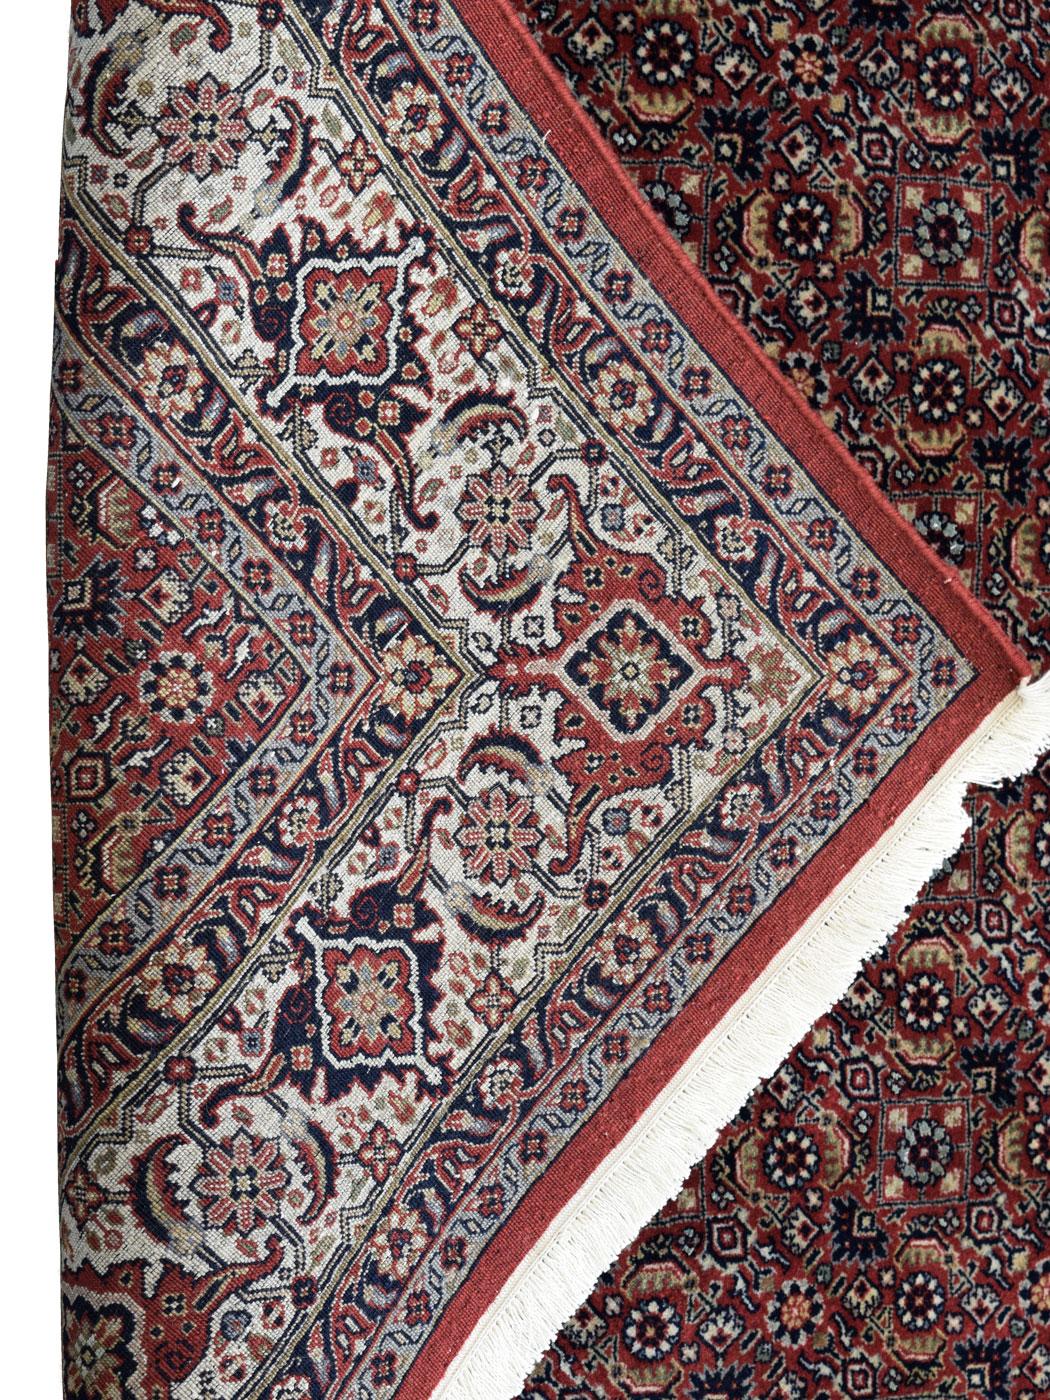 Contemporary Classic Hand-Knotted Bidjar Carpet in Red, Indigo, and Cream Wool, 5' x 7' For Sale